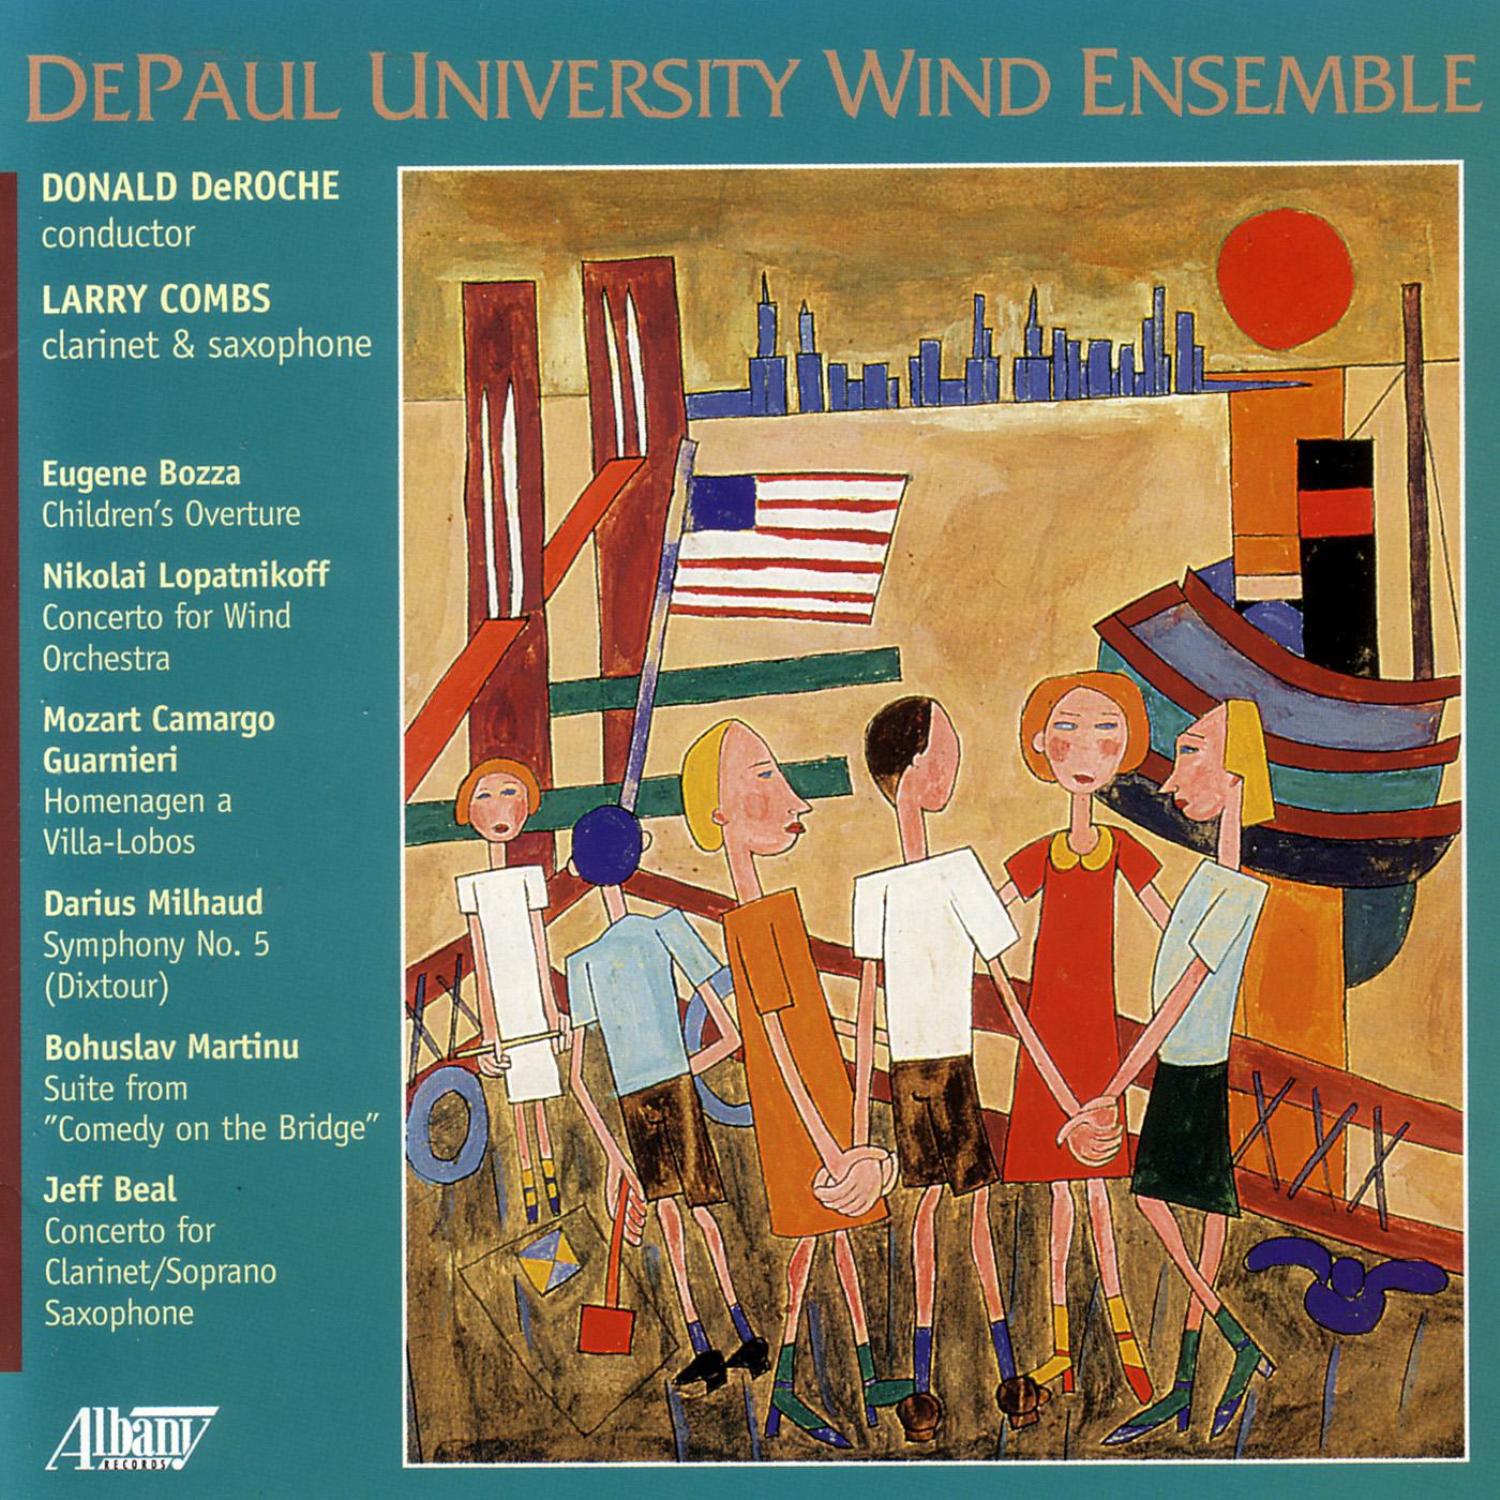 DePaul University Wind Ensemble - Concerto for Clarinet/Soprano Saxophone: Famines to Feasts